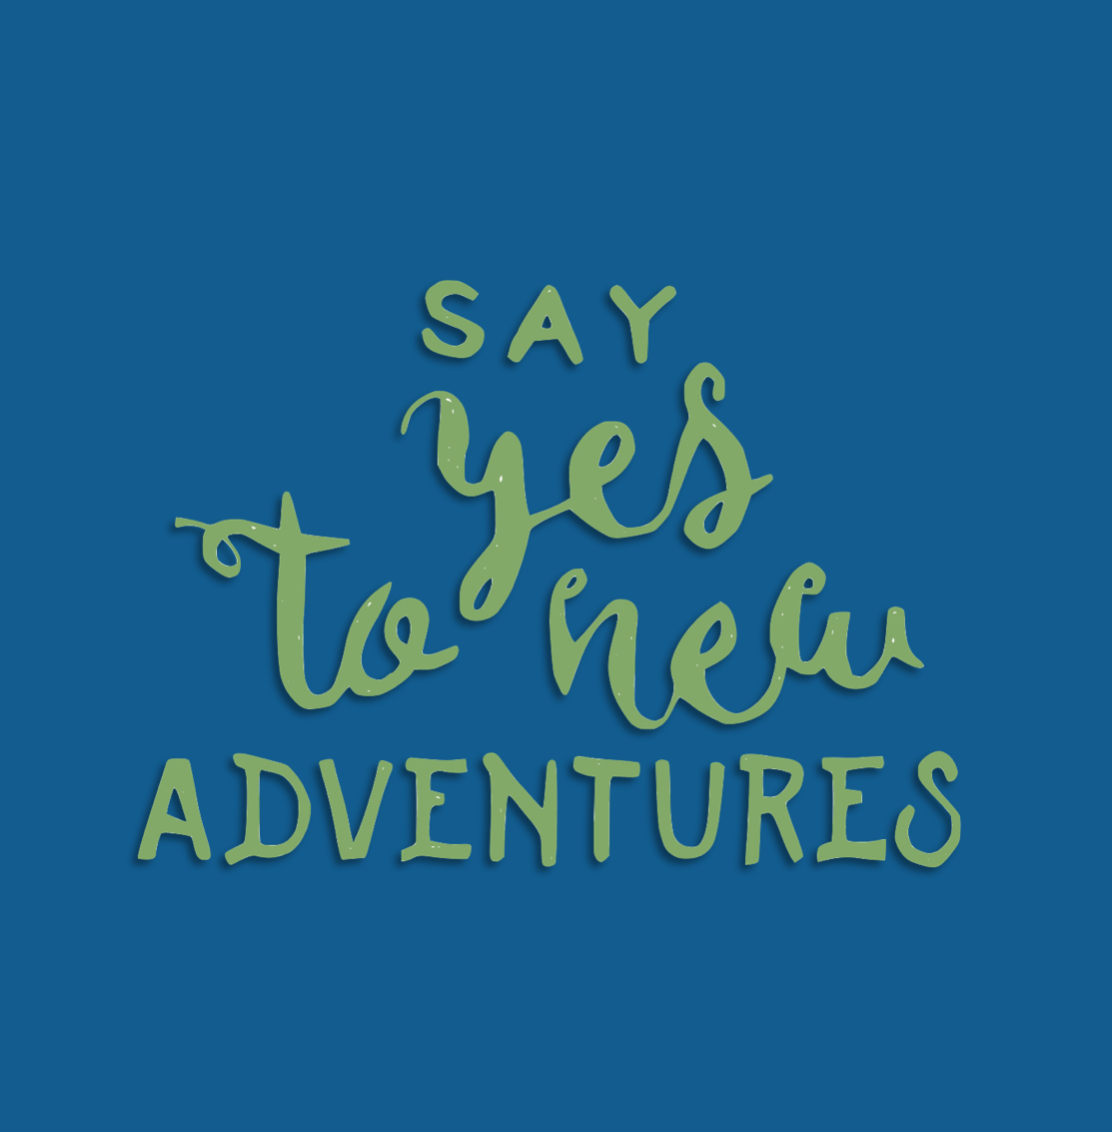 Say yes to New adventures